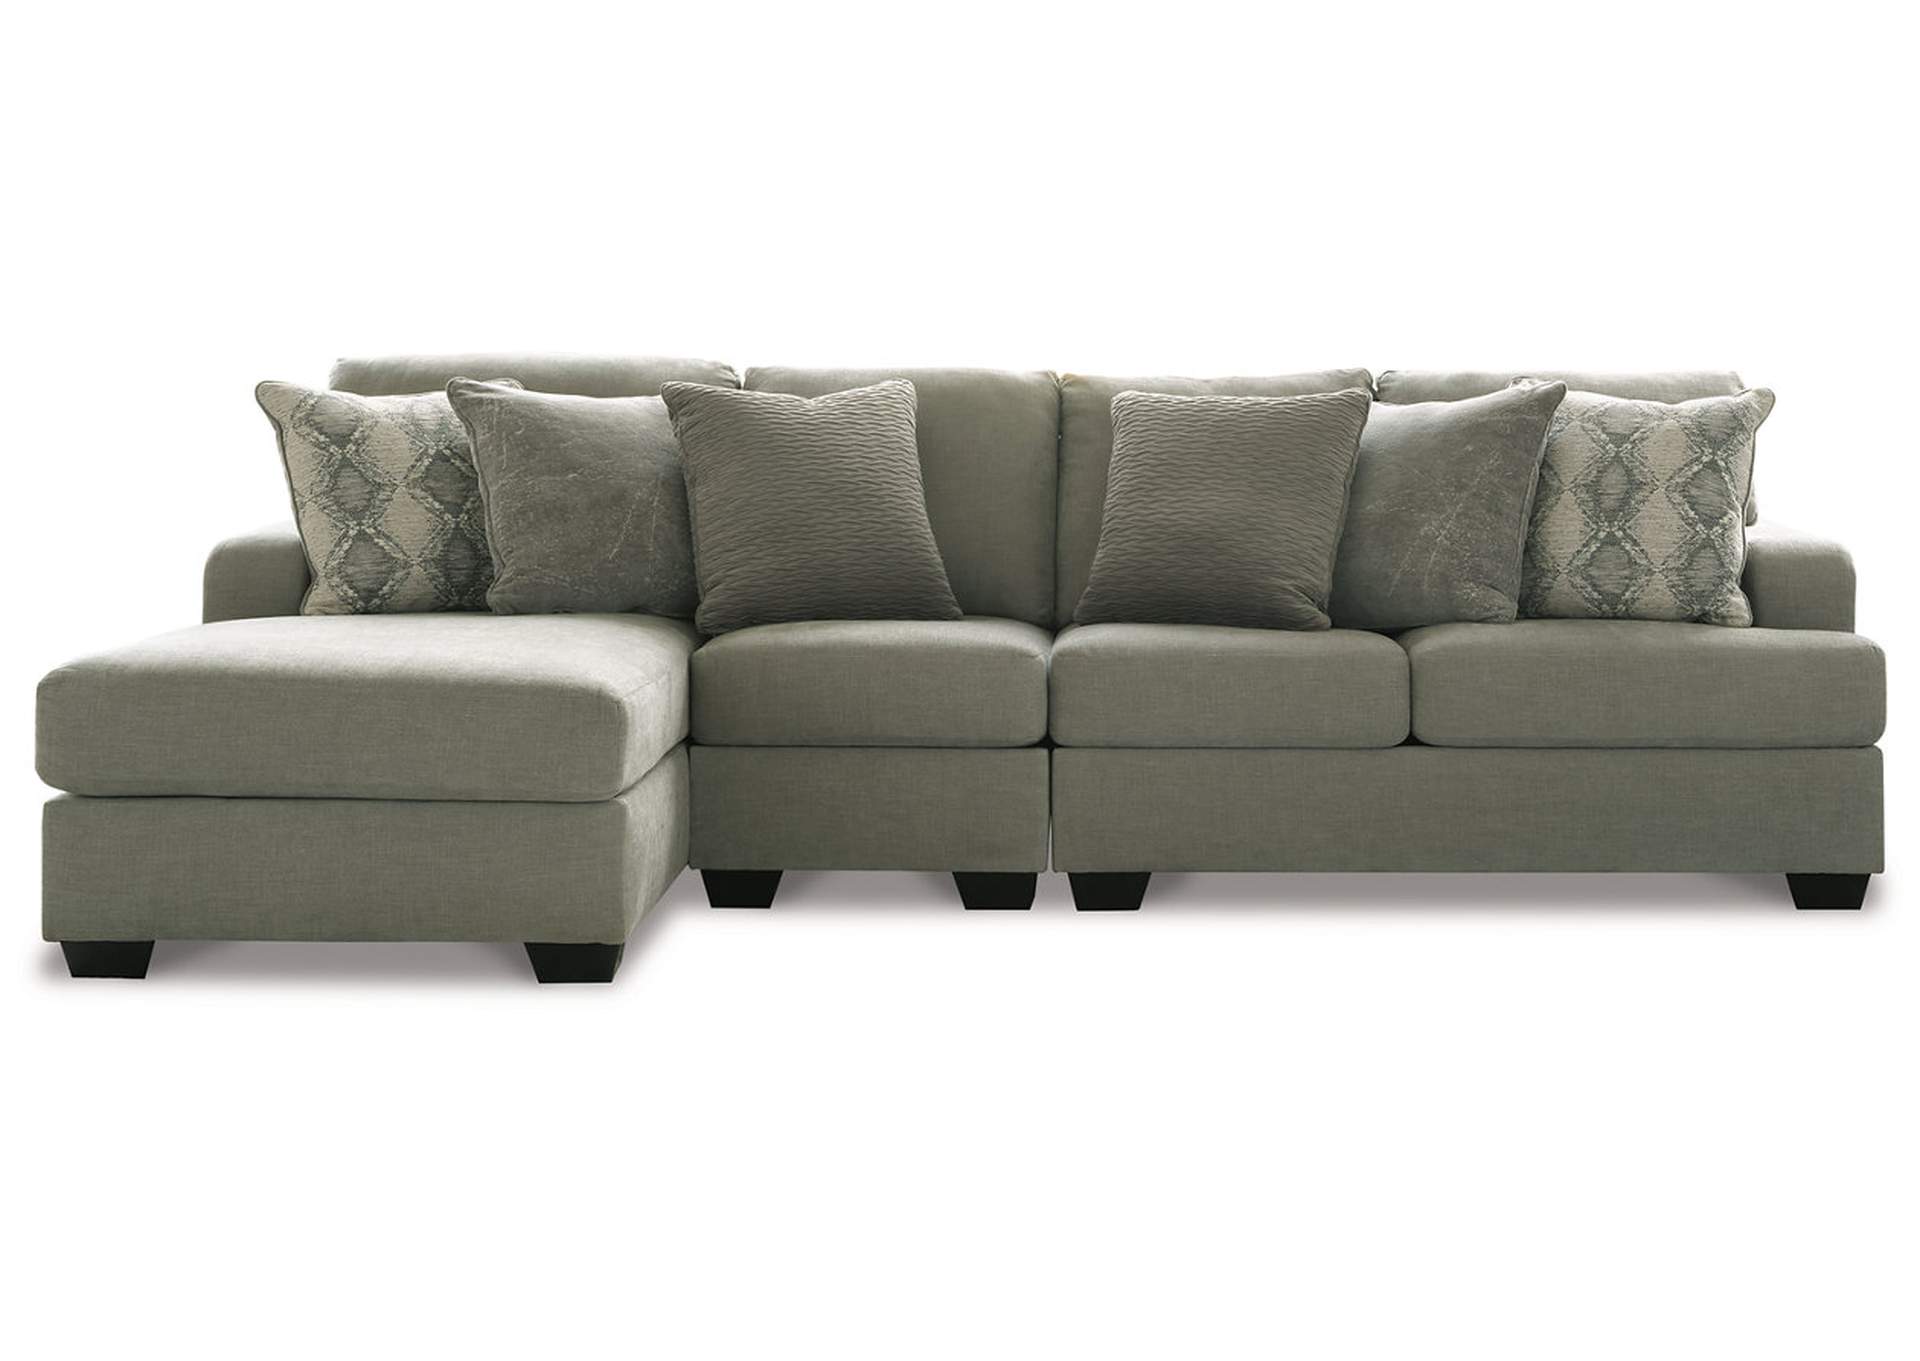 Keener 3-Piece Sectional with Ottoman,Ashley